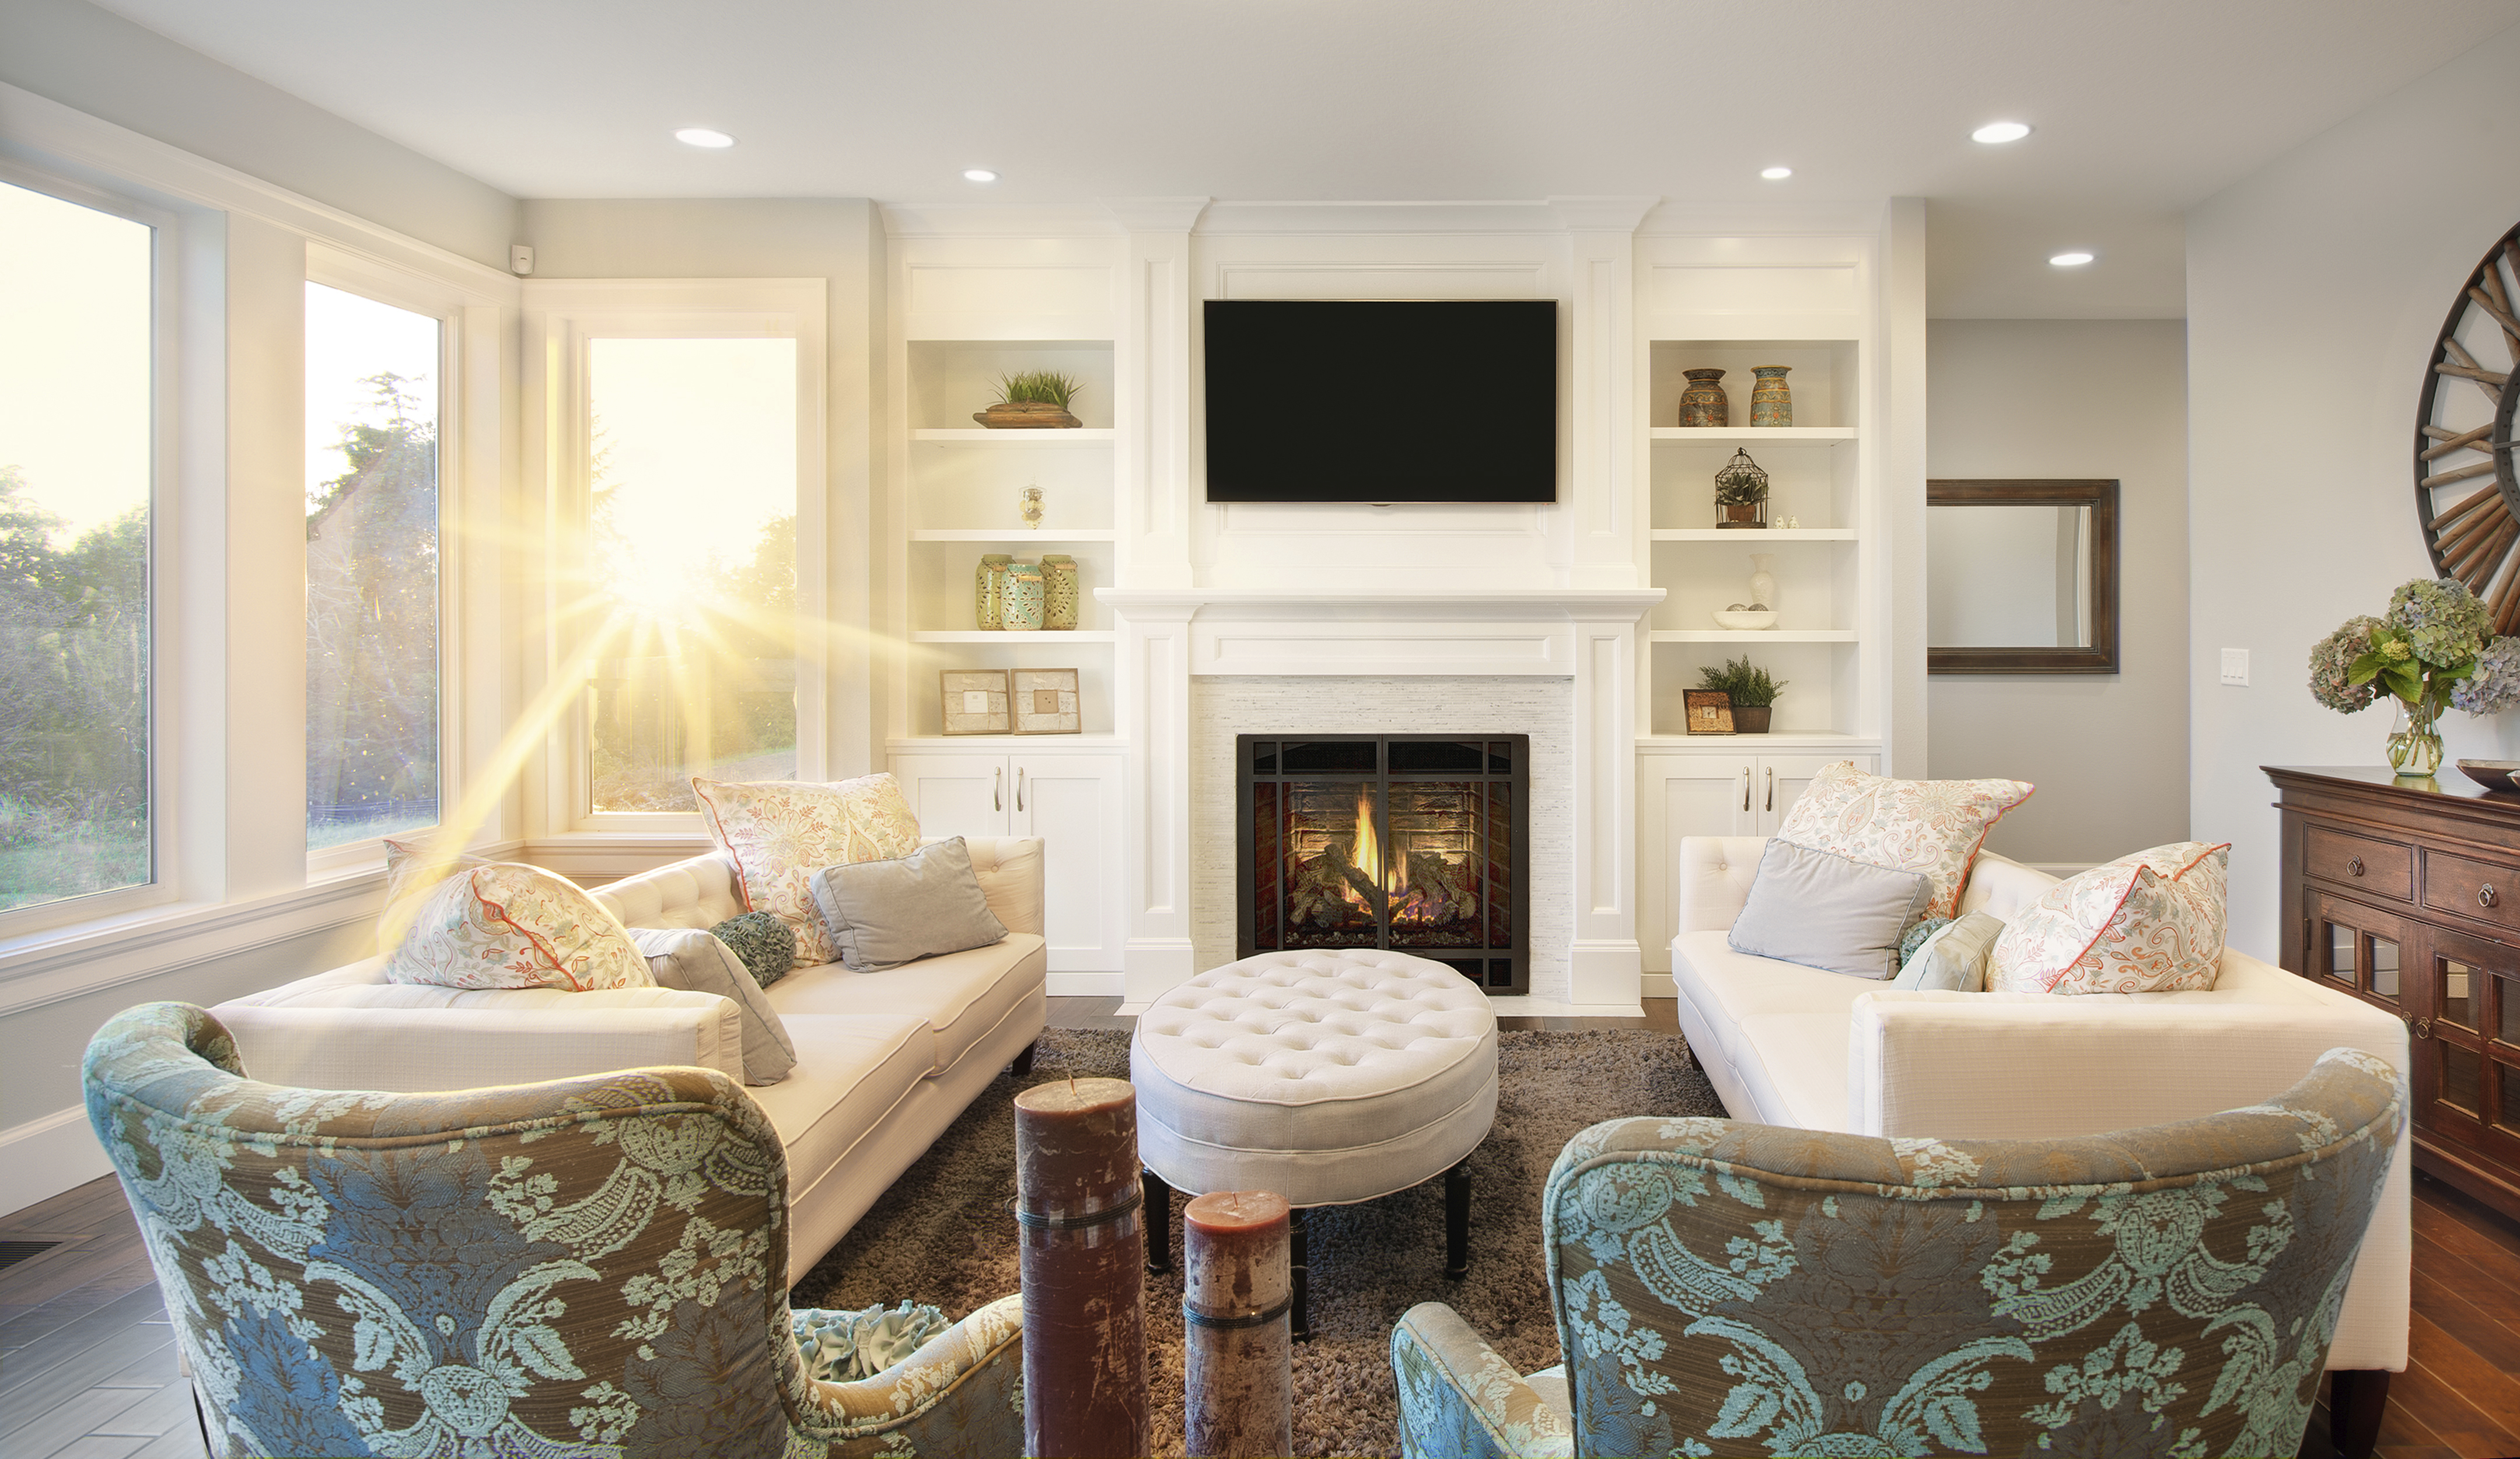 Organized Living Room - Chaos to Order - Chicago Professional ...